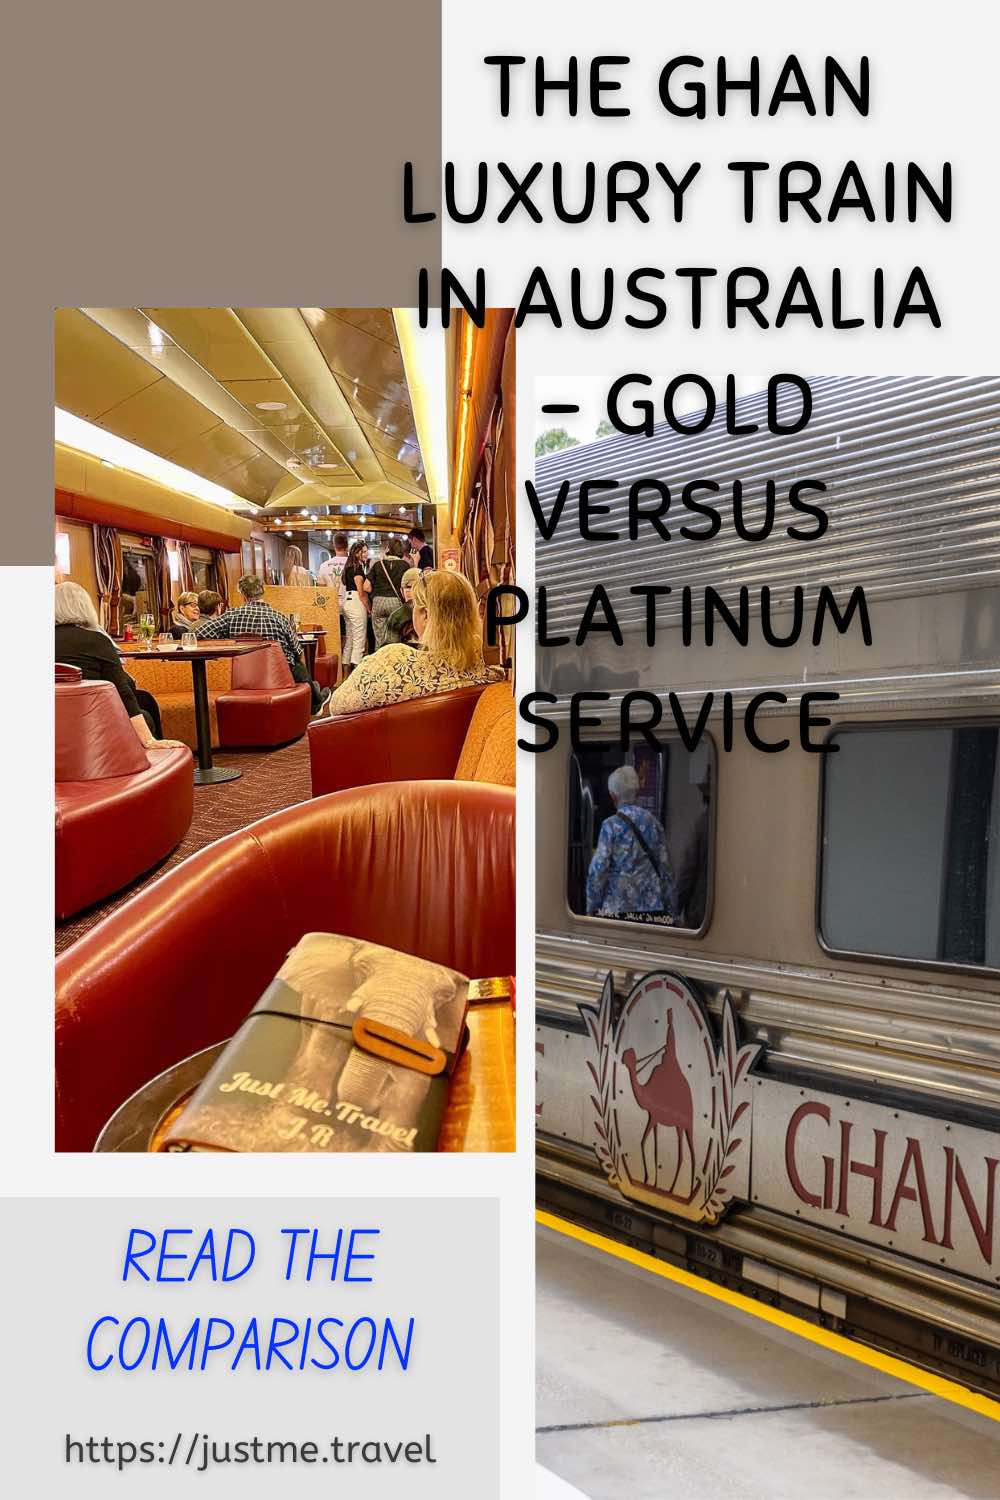 The image has two photos. One is of a train carriage with The Ghan sign on the outside. The other photo is of a lounge carriage on the Ghan train with chairs, tables and lounges.